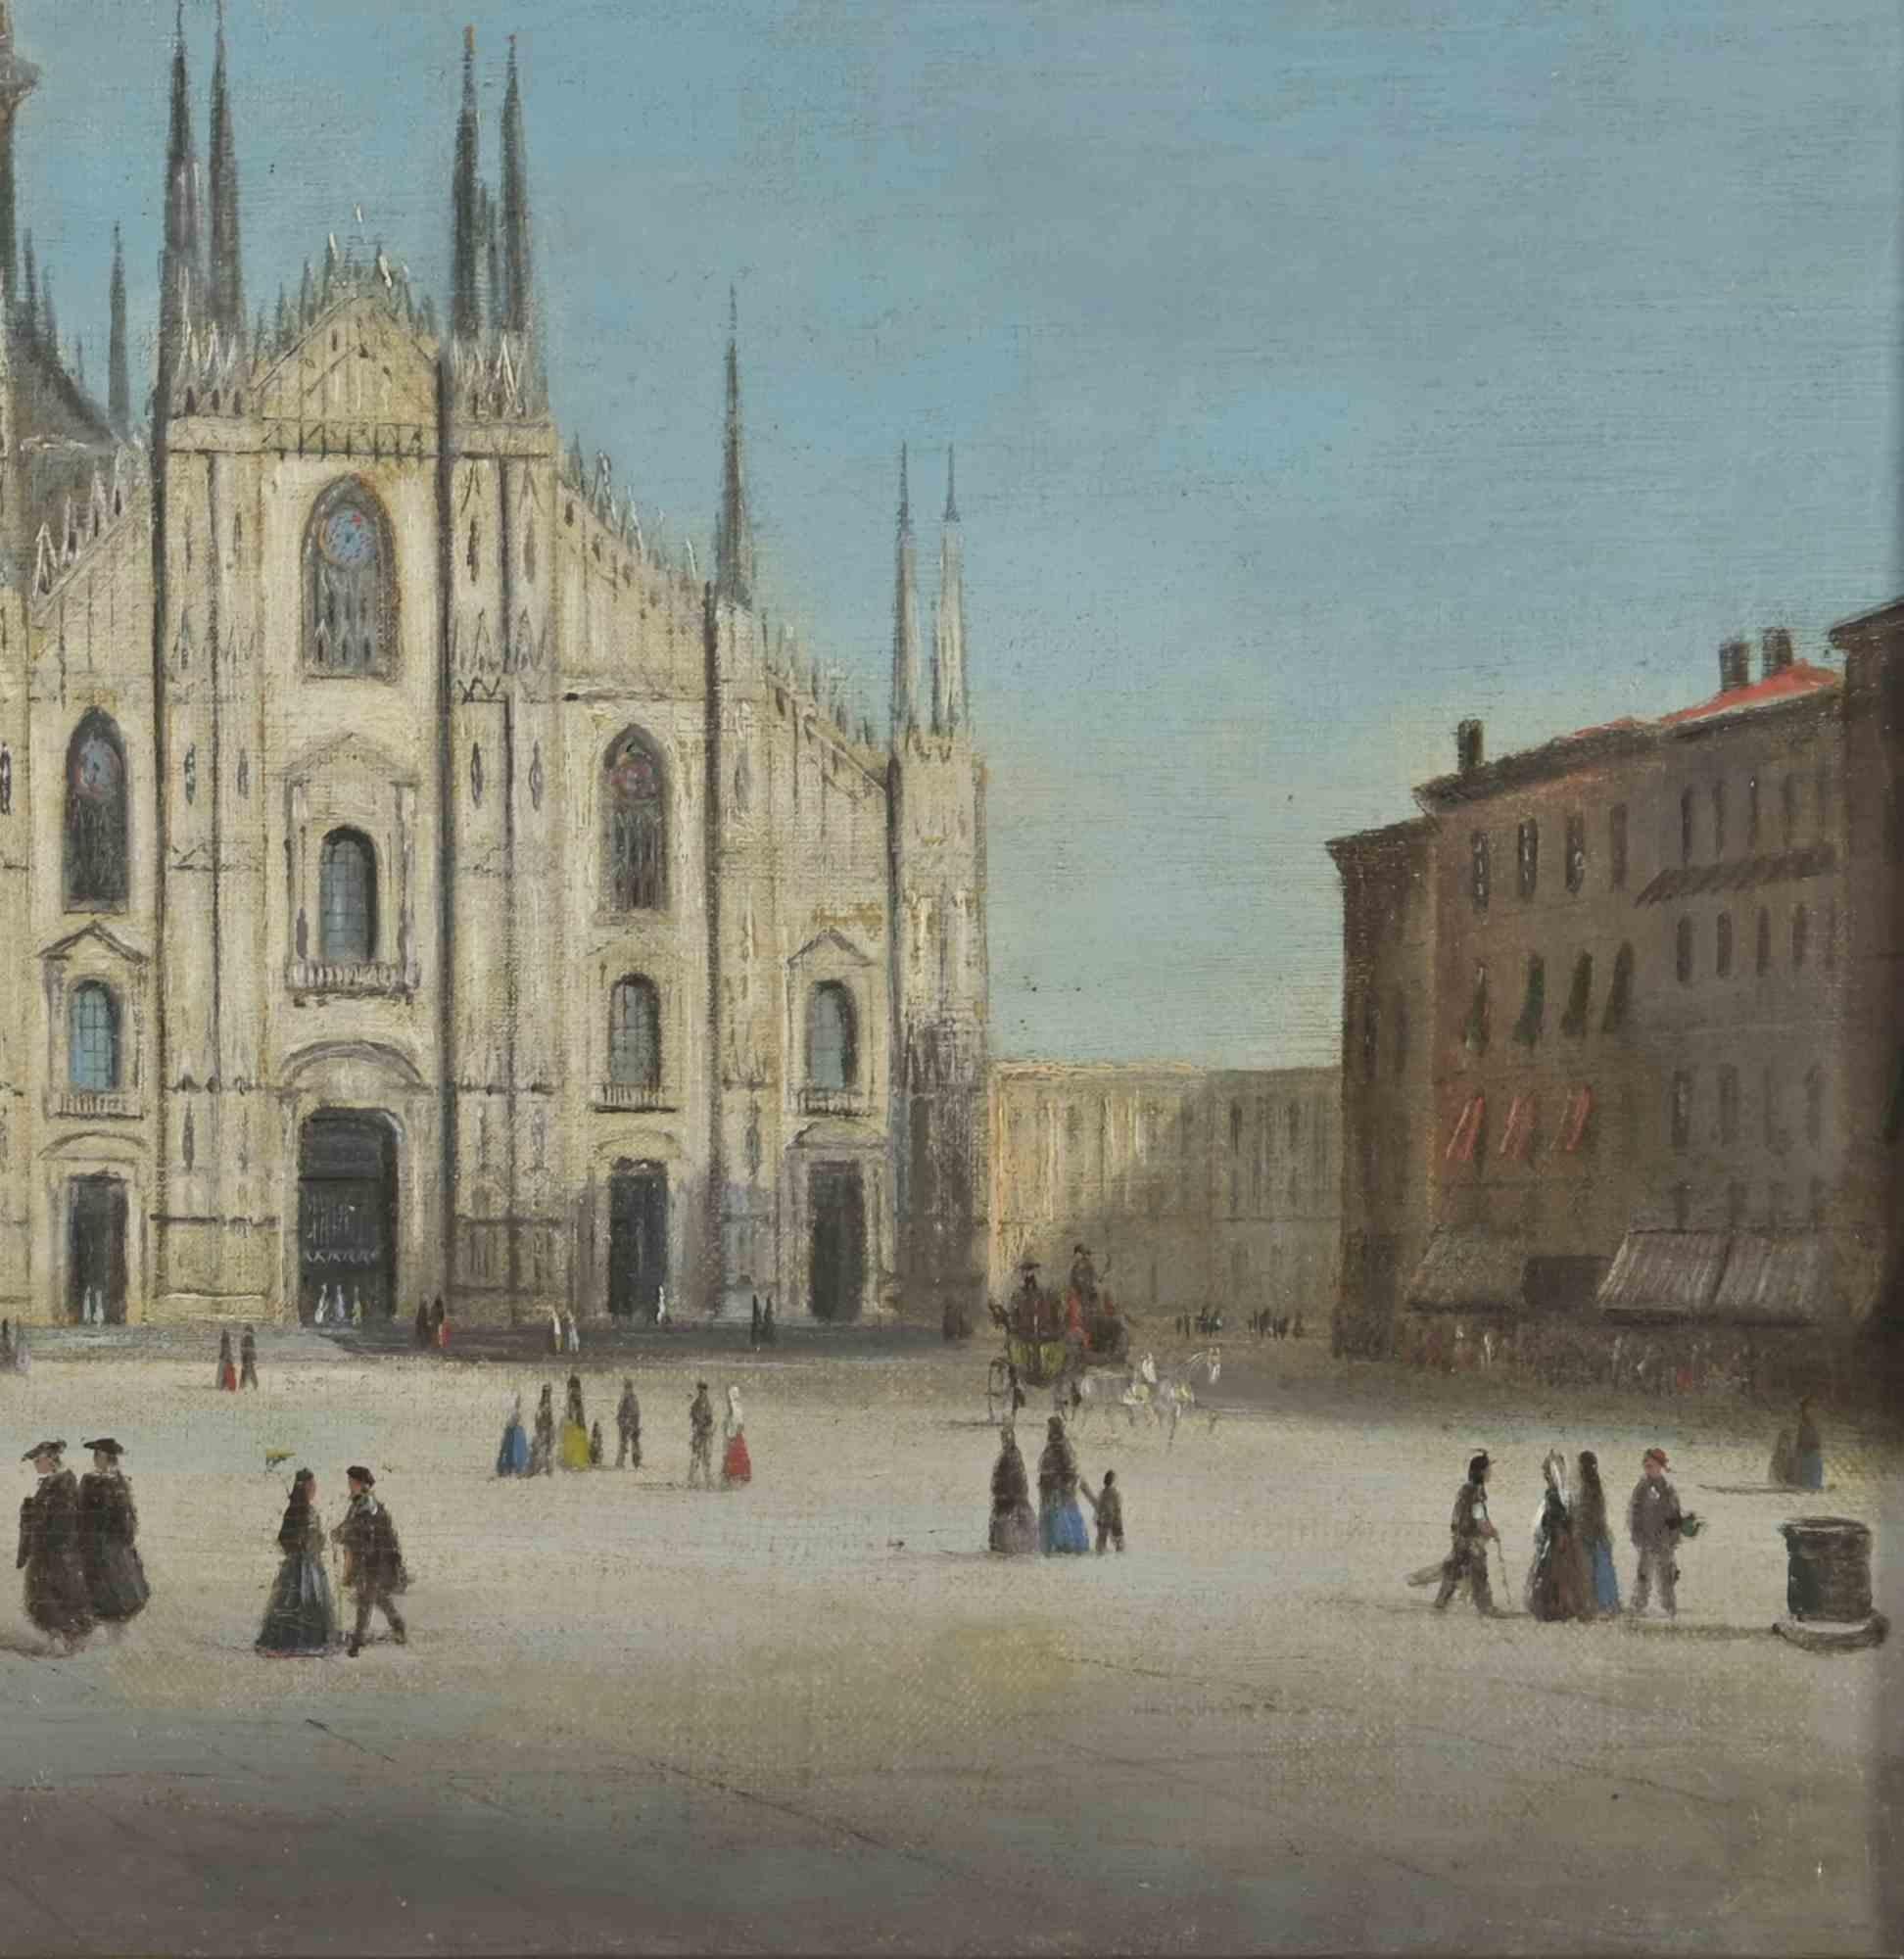 Duomo of Milan with peasants is a modern artwork realized by an Italian Artist in 18th century.

Mixed colored oil on canvas

40x33cm  with frame included.

Good conditions. 